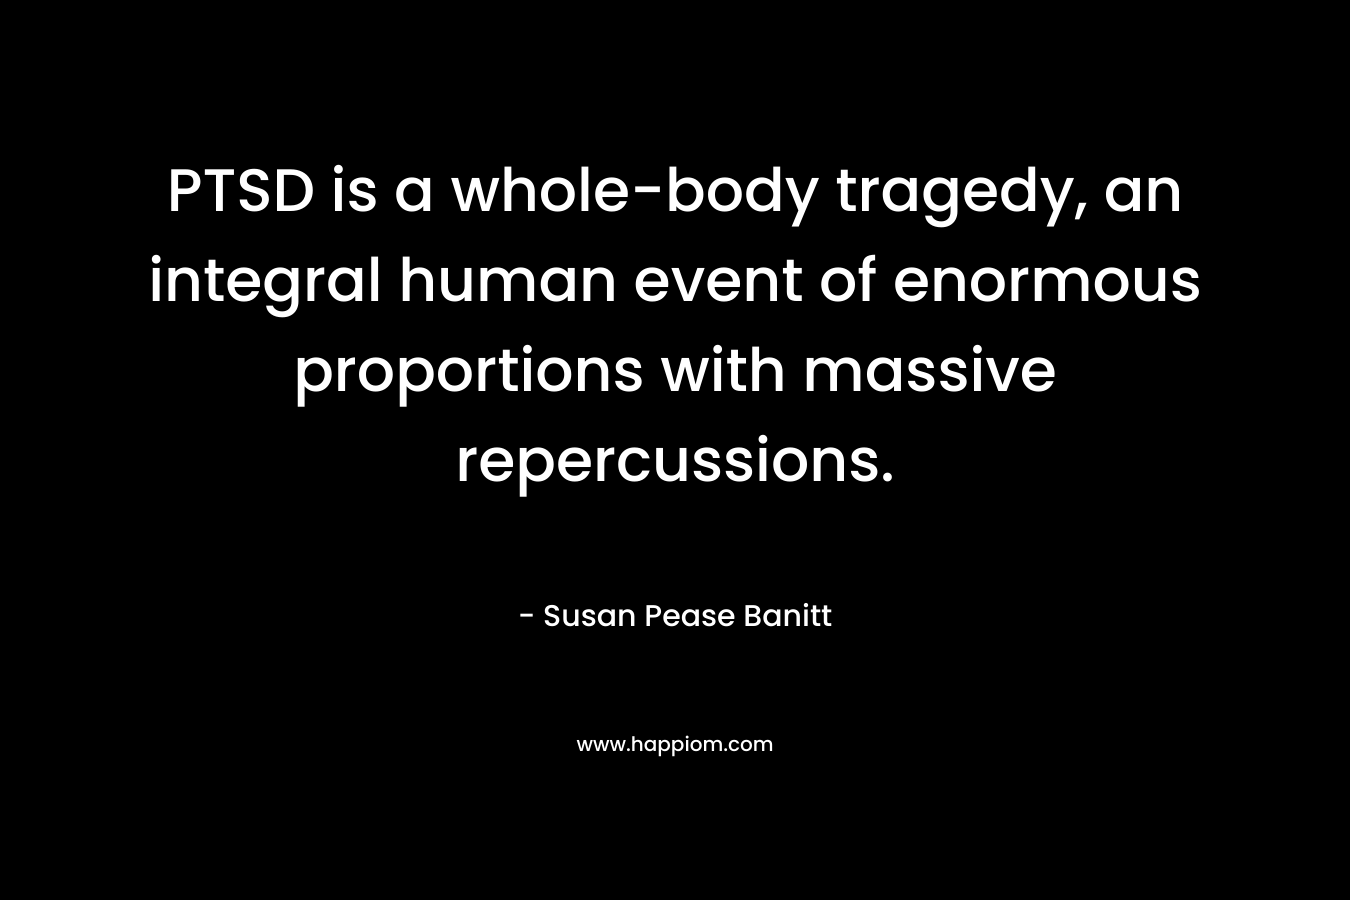 PTSD is a whole-body tragedy, an integral human event of enormous proportions with massive repercussions. – Susan Pease Banitt